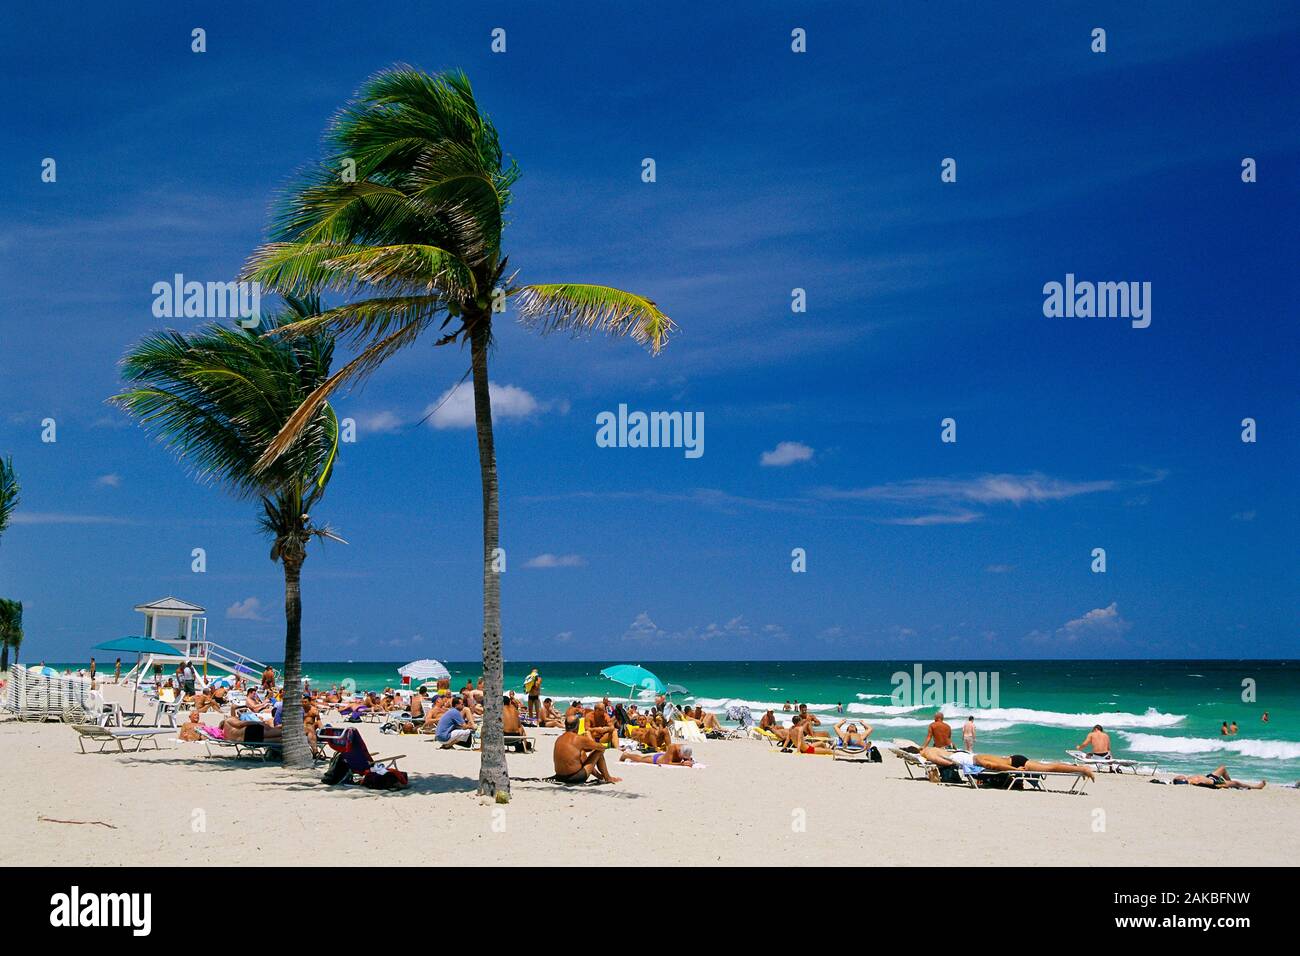 People relaxing on beach, Fort Lauderdale, Florida, USA Stock Photo